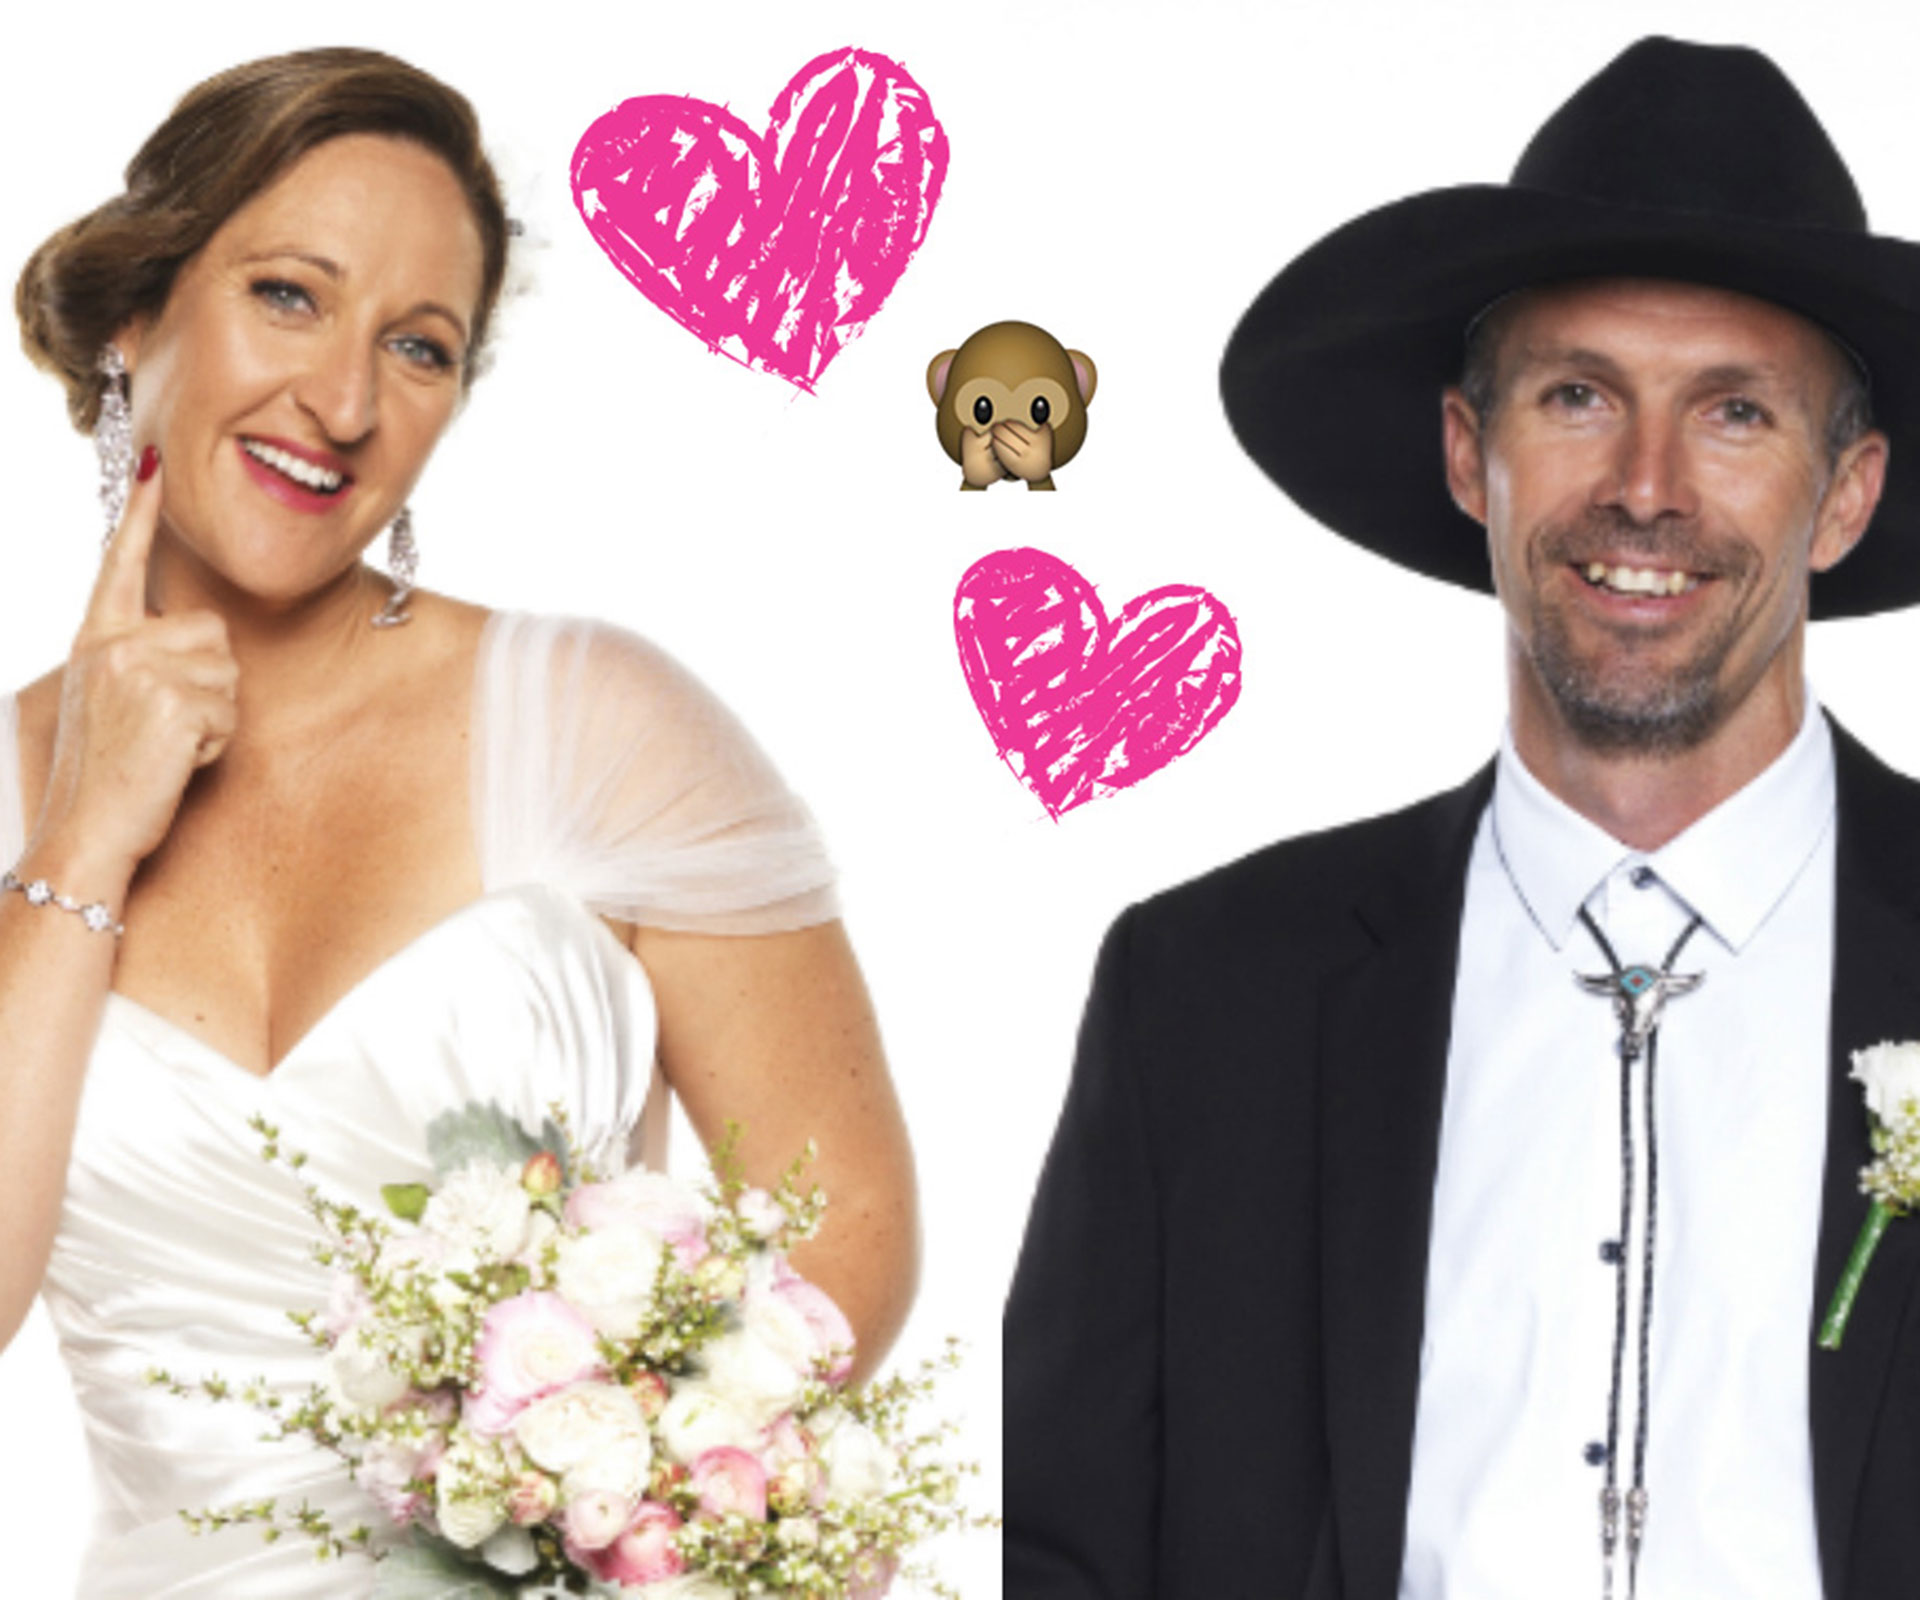 susan, sean, married at first sight